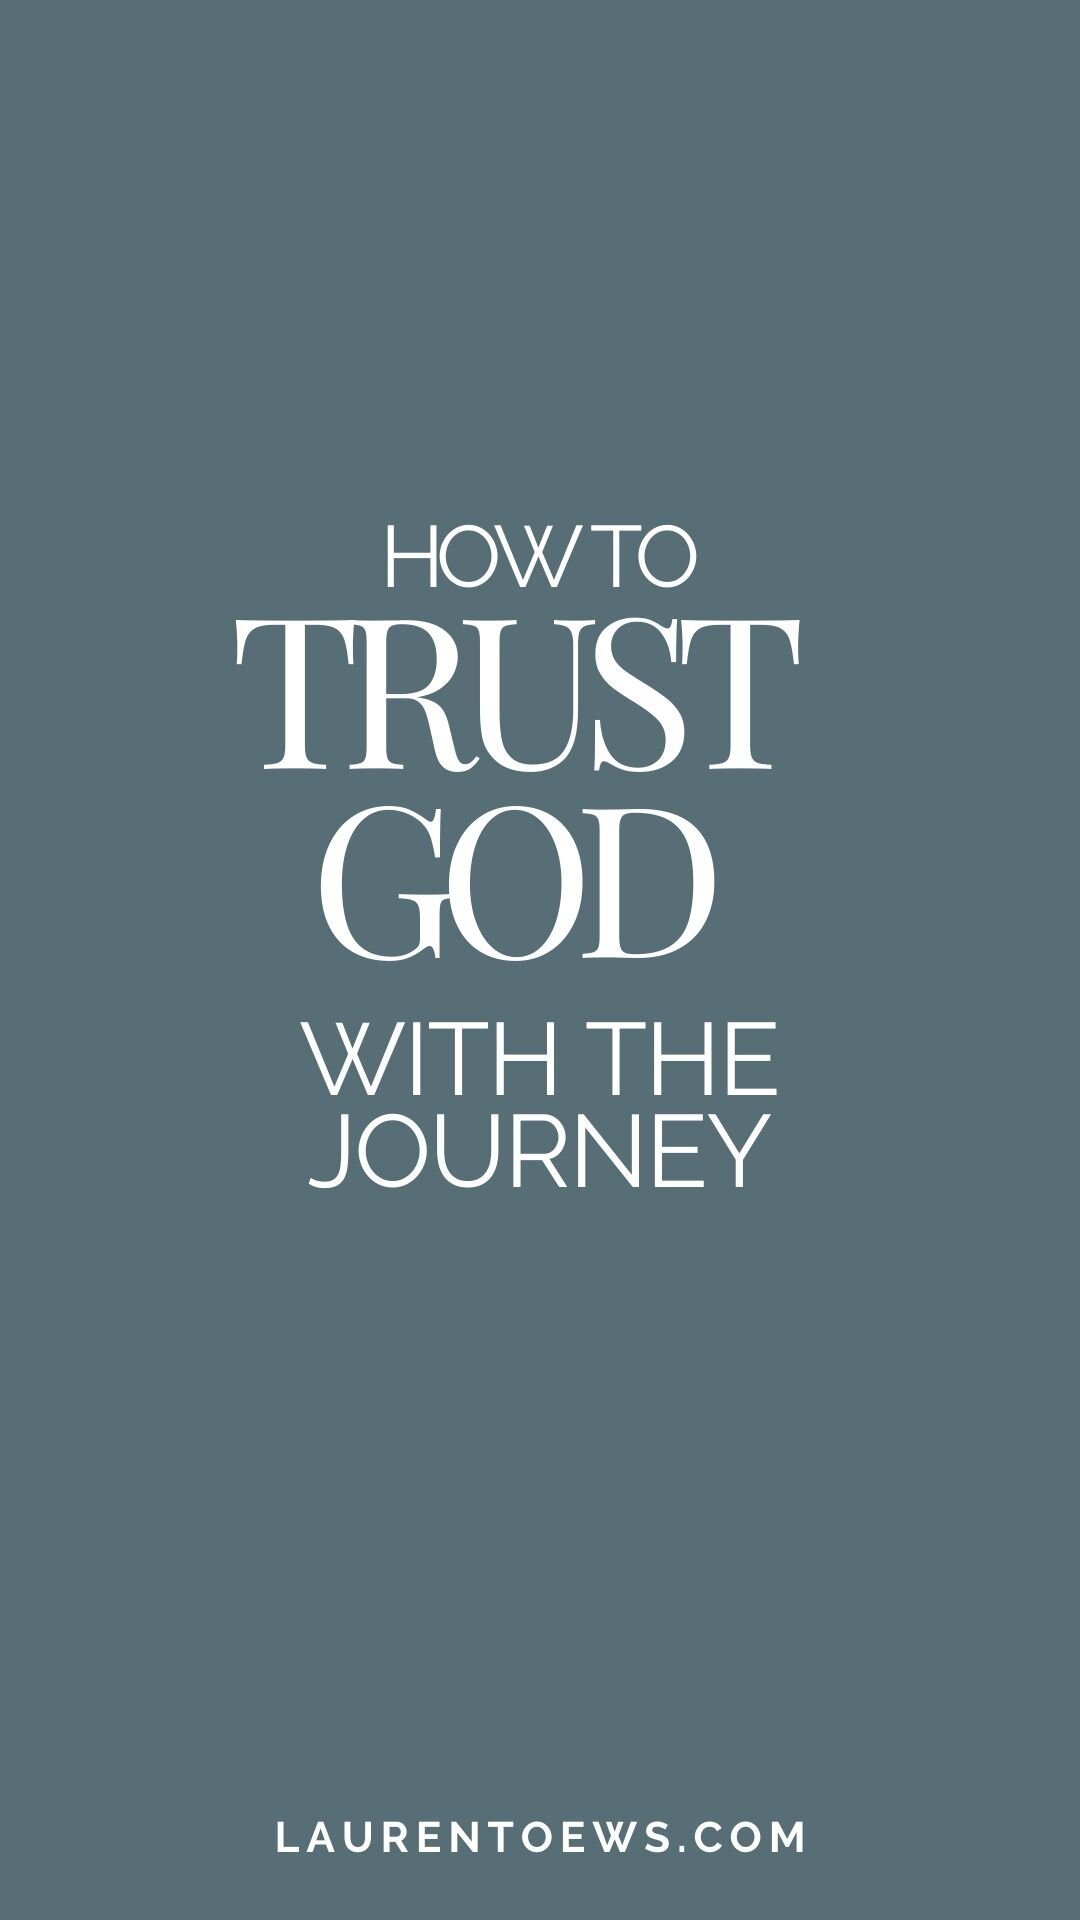 How to trust God with the journey of your life